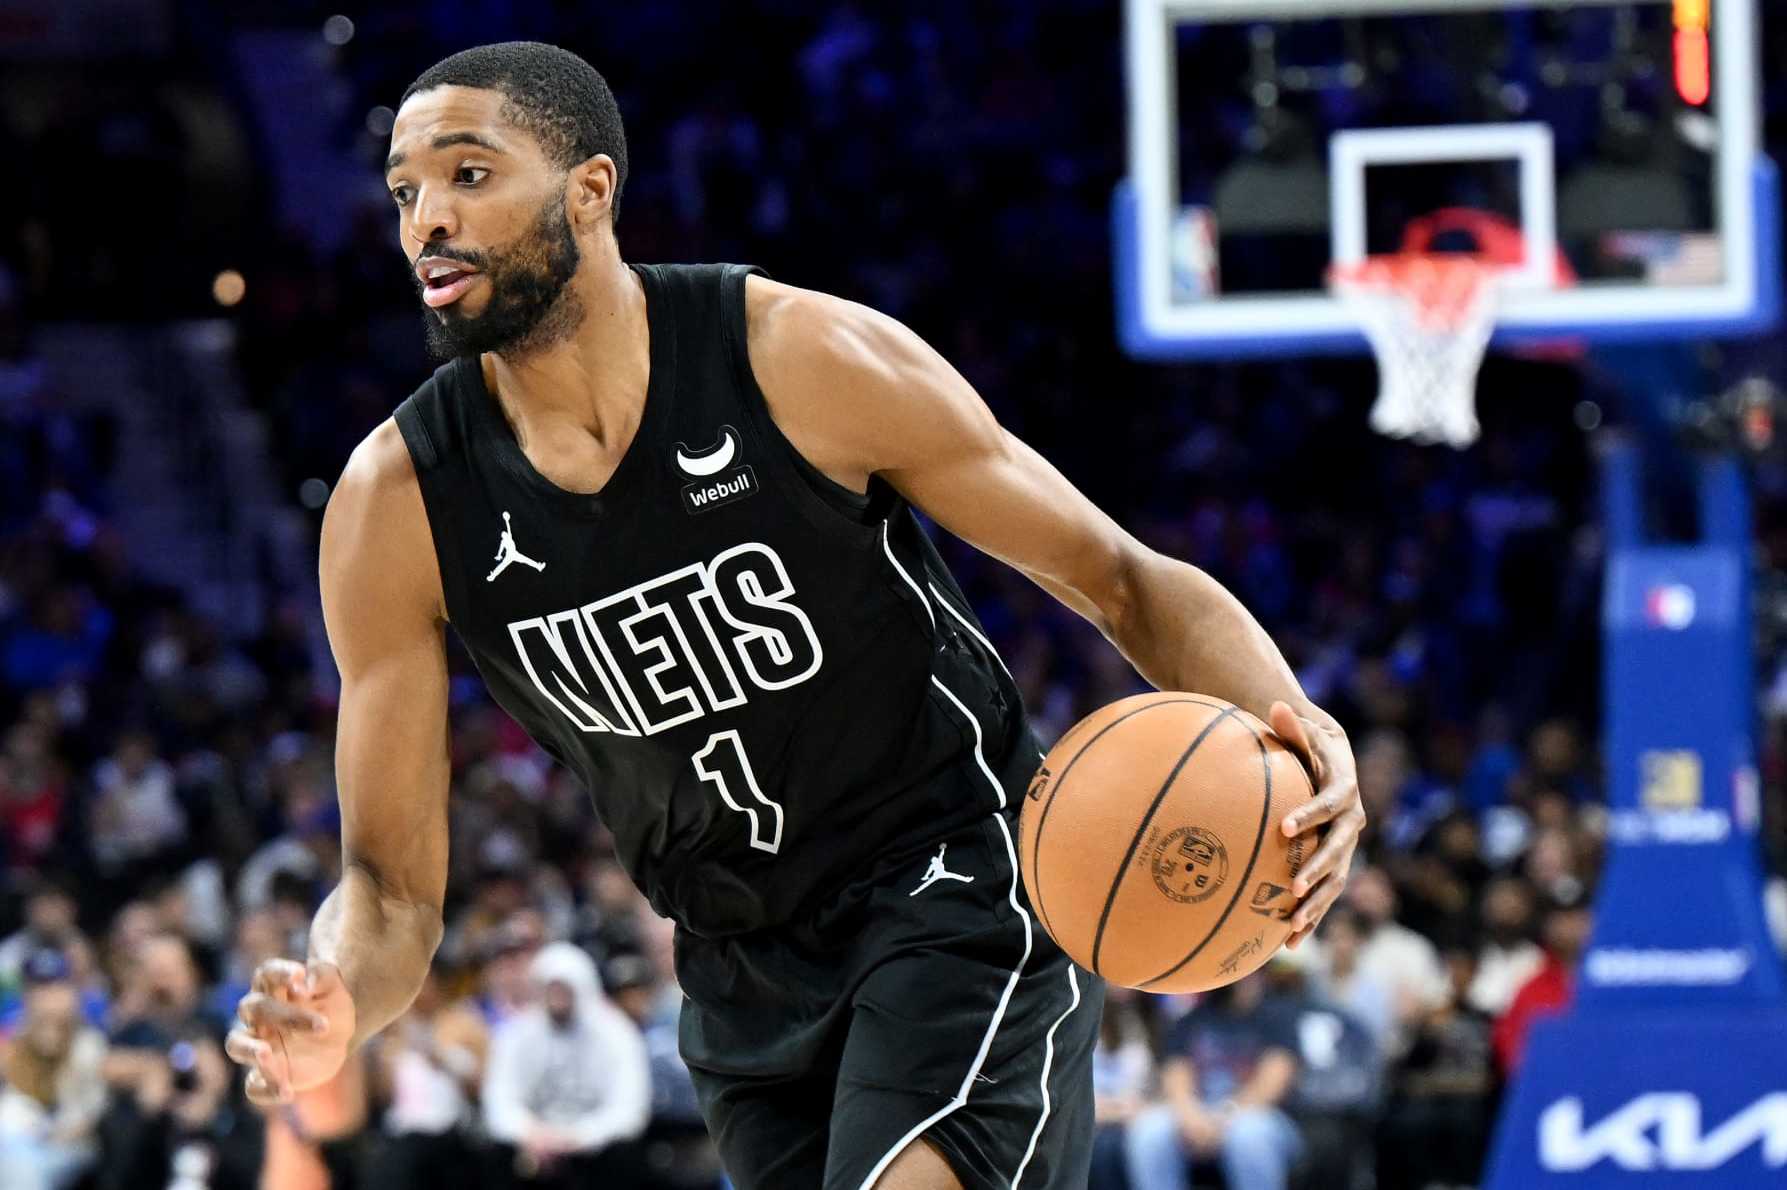 Mikal Bridges tells Nets after Knicks trade: “The love will always be there”